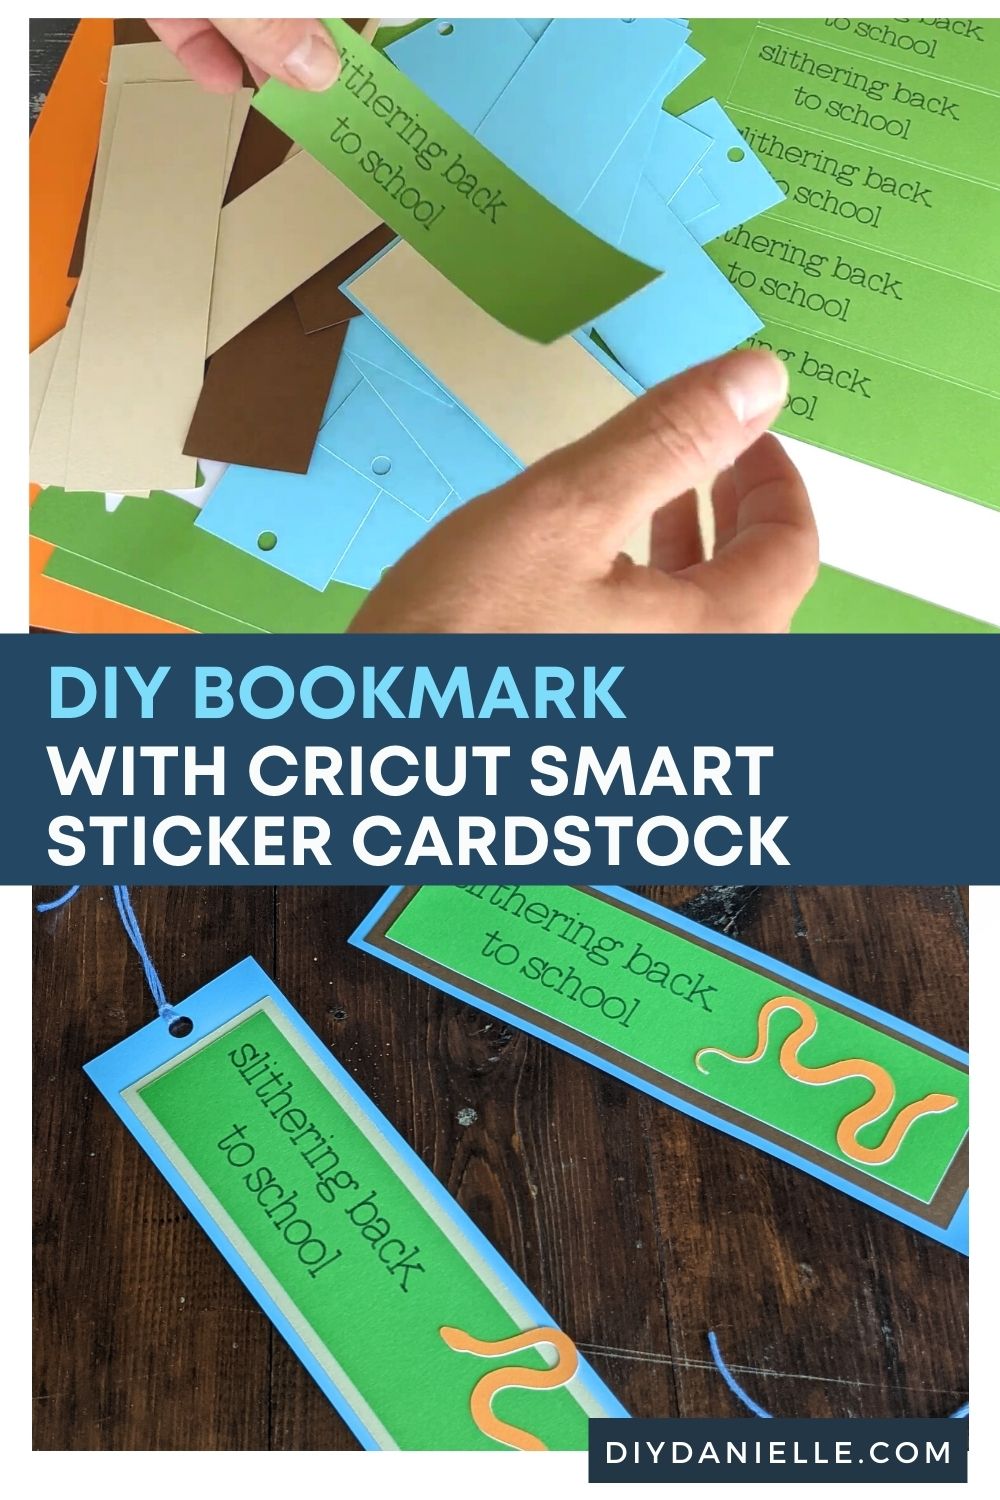 DIY Paper Bookmarks for Back to School with Cricut - DIY Danielle®